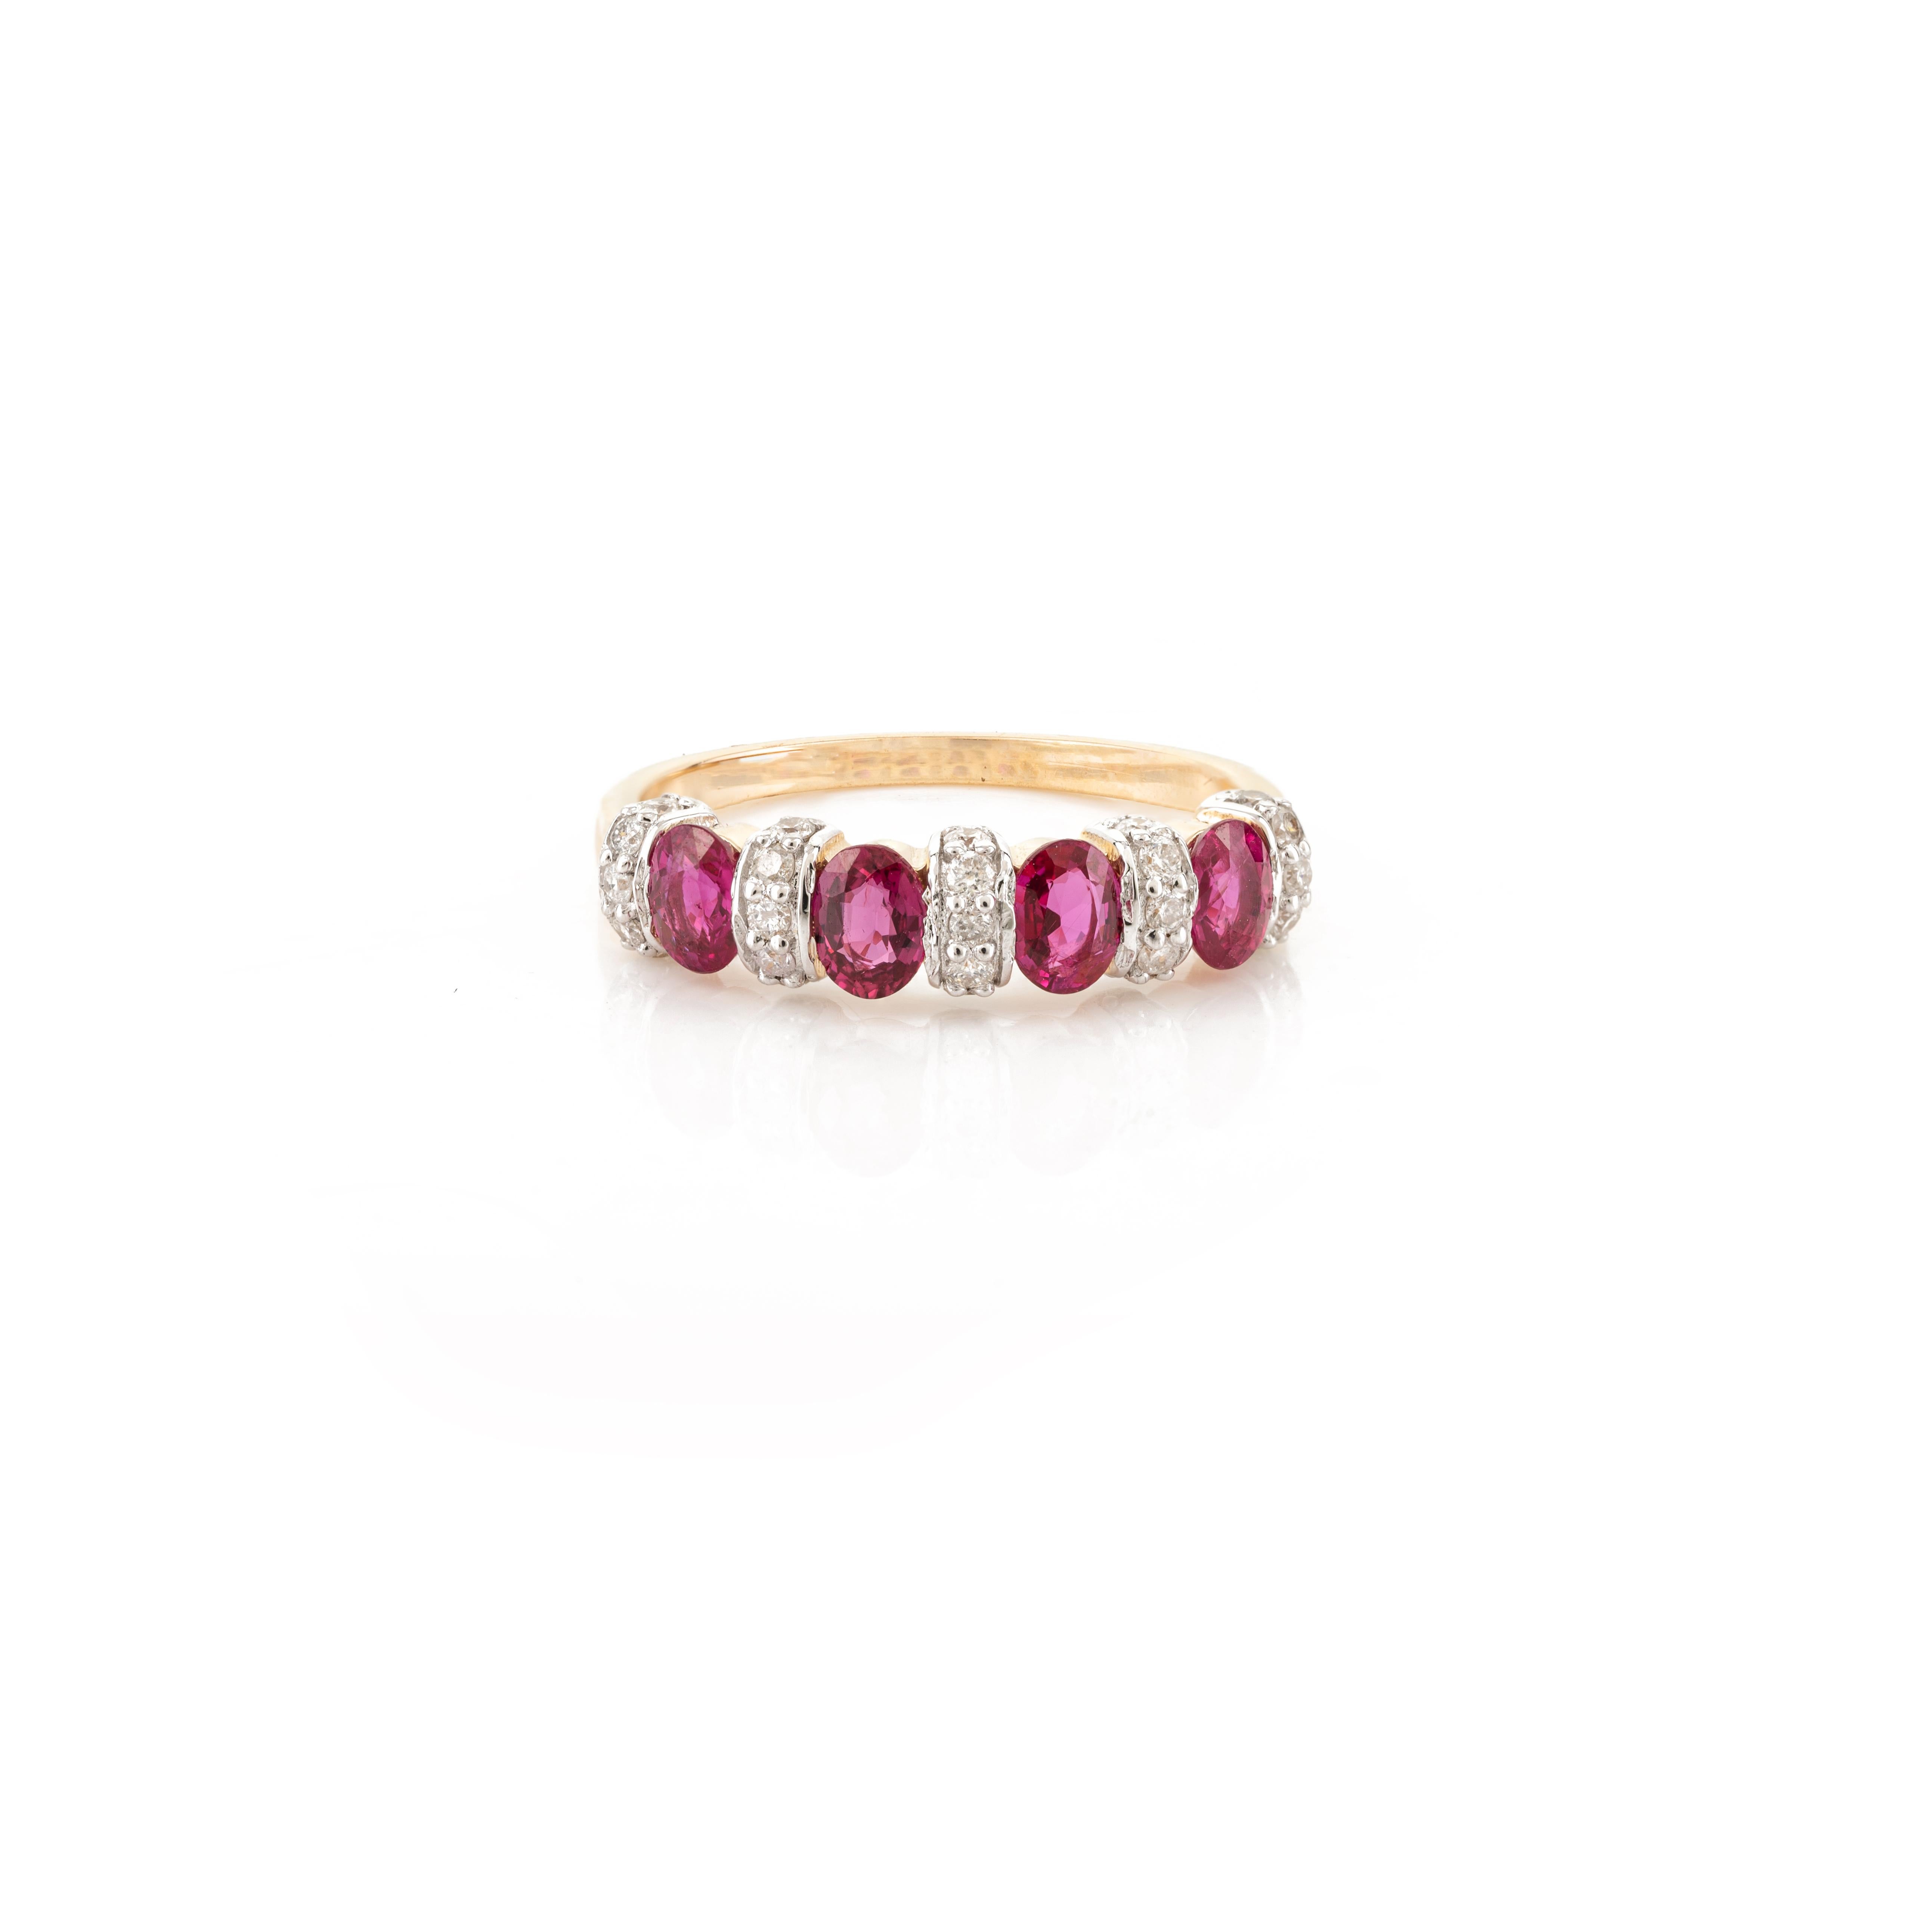 For Sale:  Alternate Ruby and Diamond Half Eternity Engagement Band in 18k Yellow Gold 3